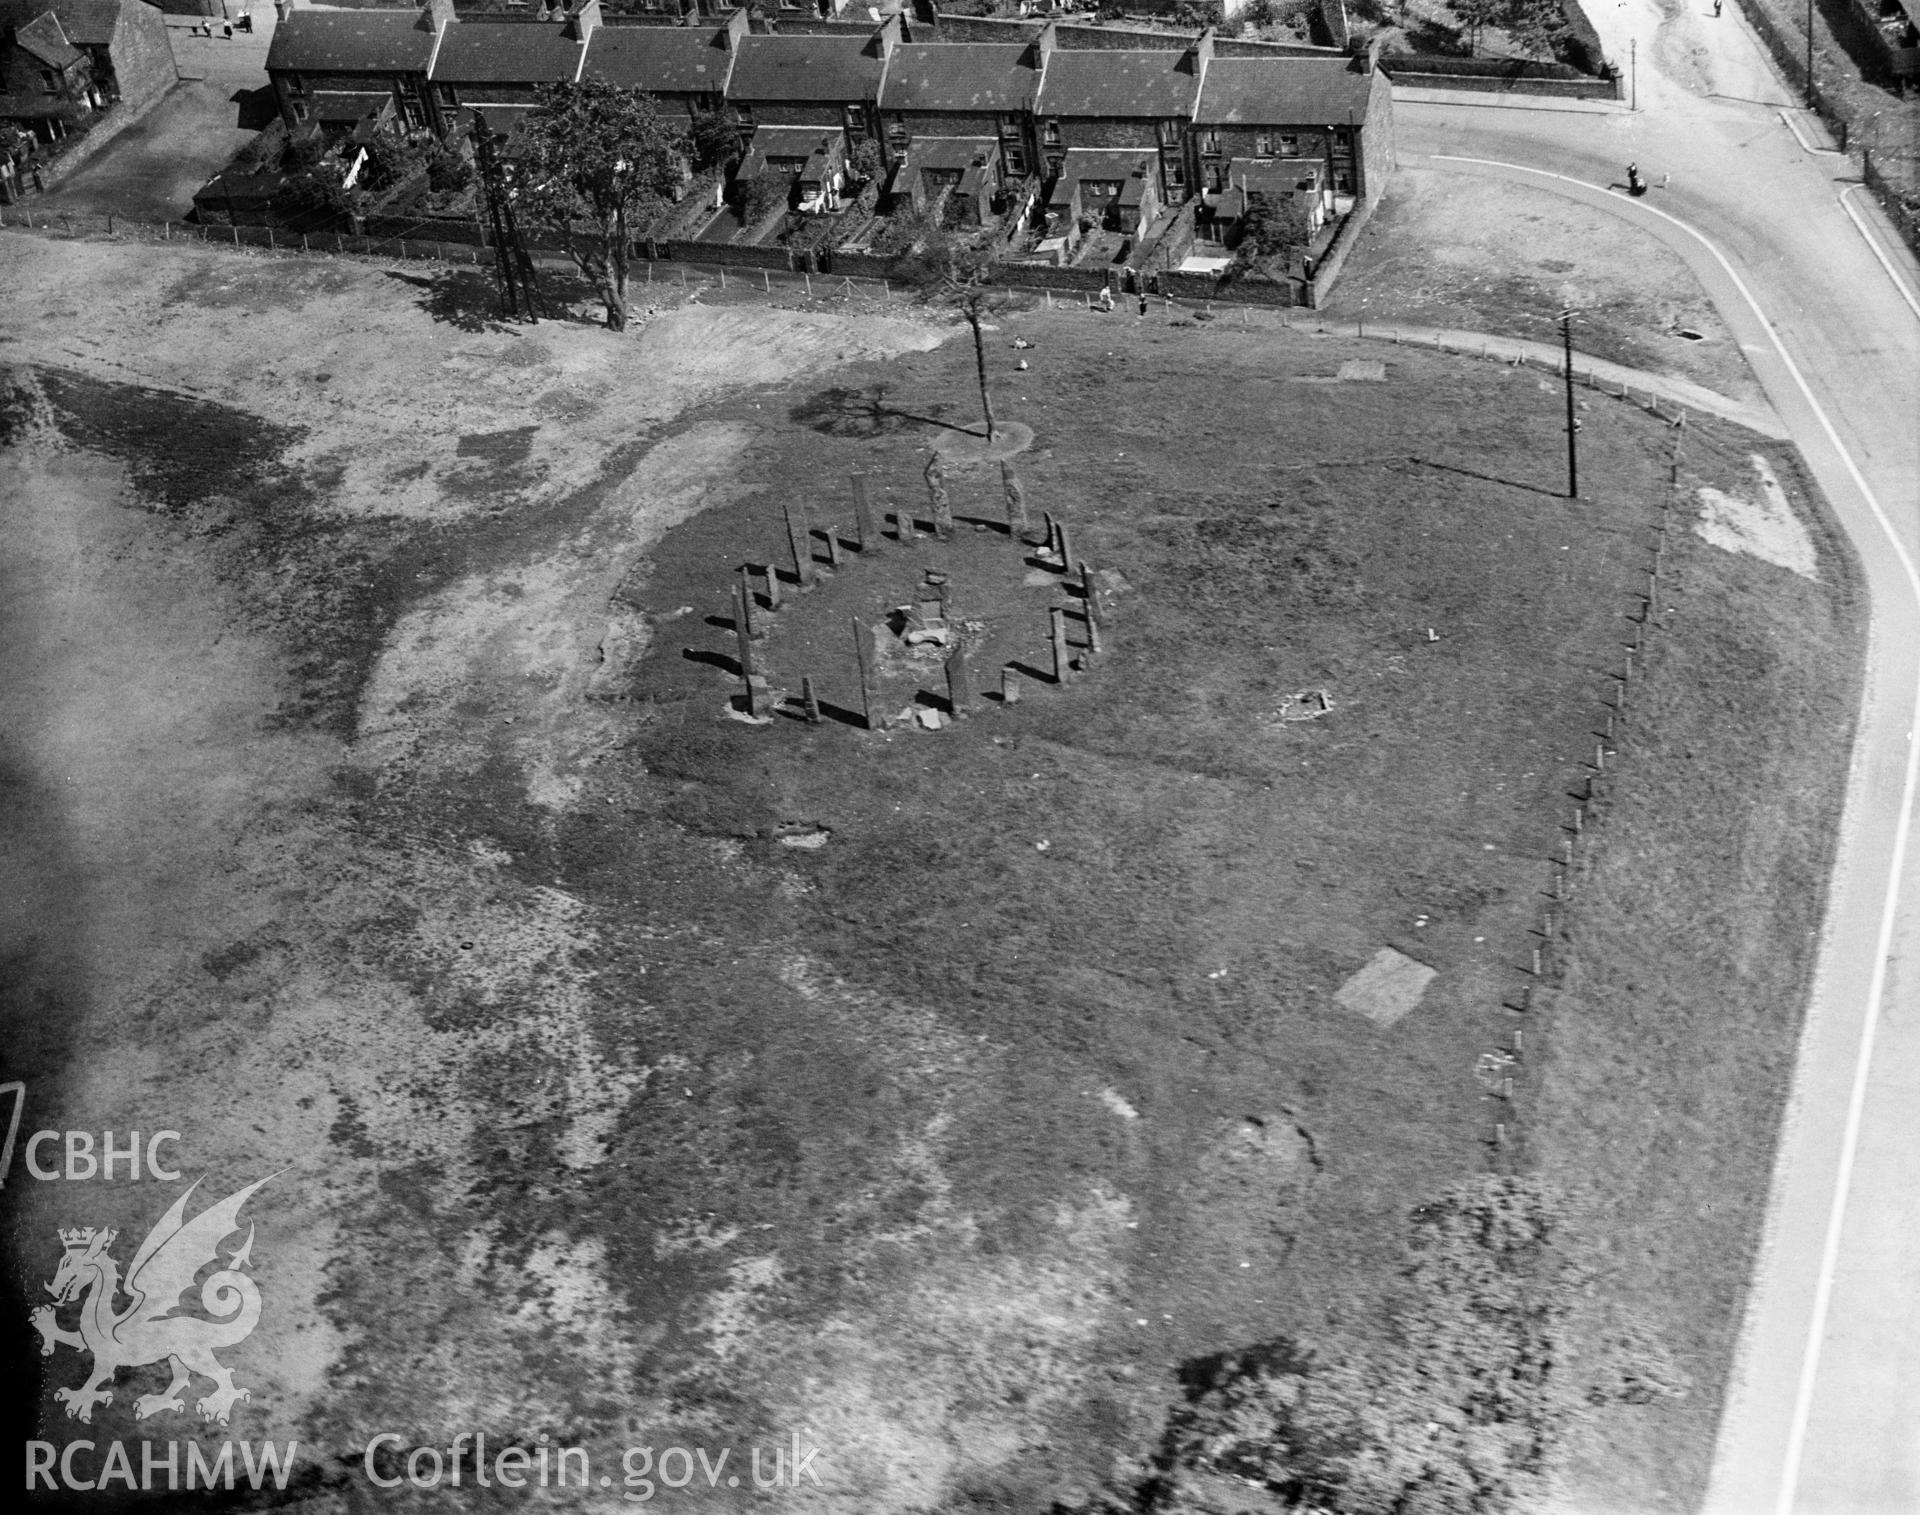 View of stone circle at  Pontypridd erected by Crawshay when he lived at the nearby Forest House, oblique aerial view. 5"x4" black and white glass plate negative.